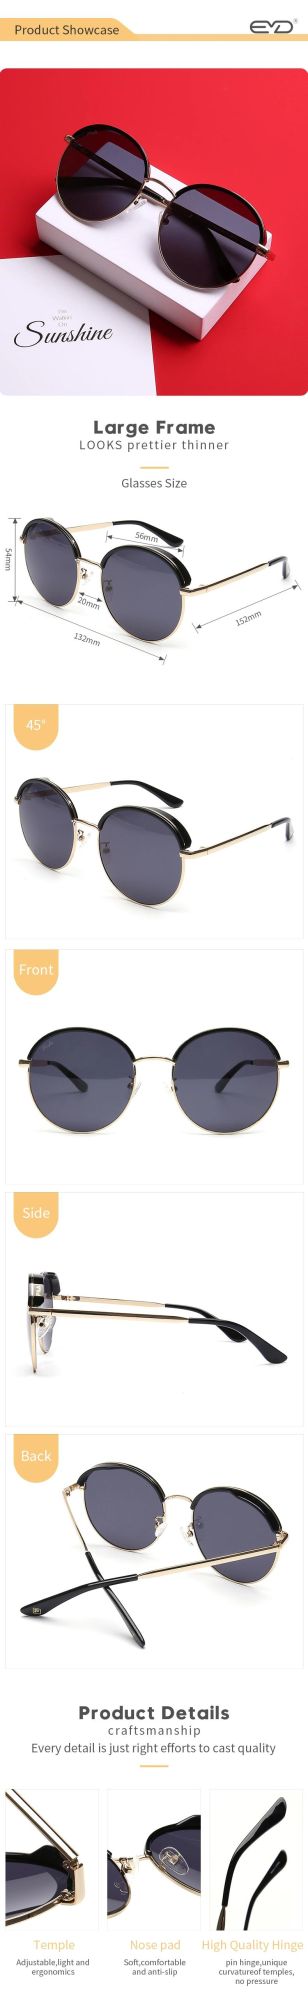 Fashion Black Lens Metal Sunglasses with CE Certificate Wholesale Round Eye Sunglasses